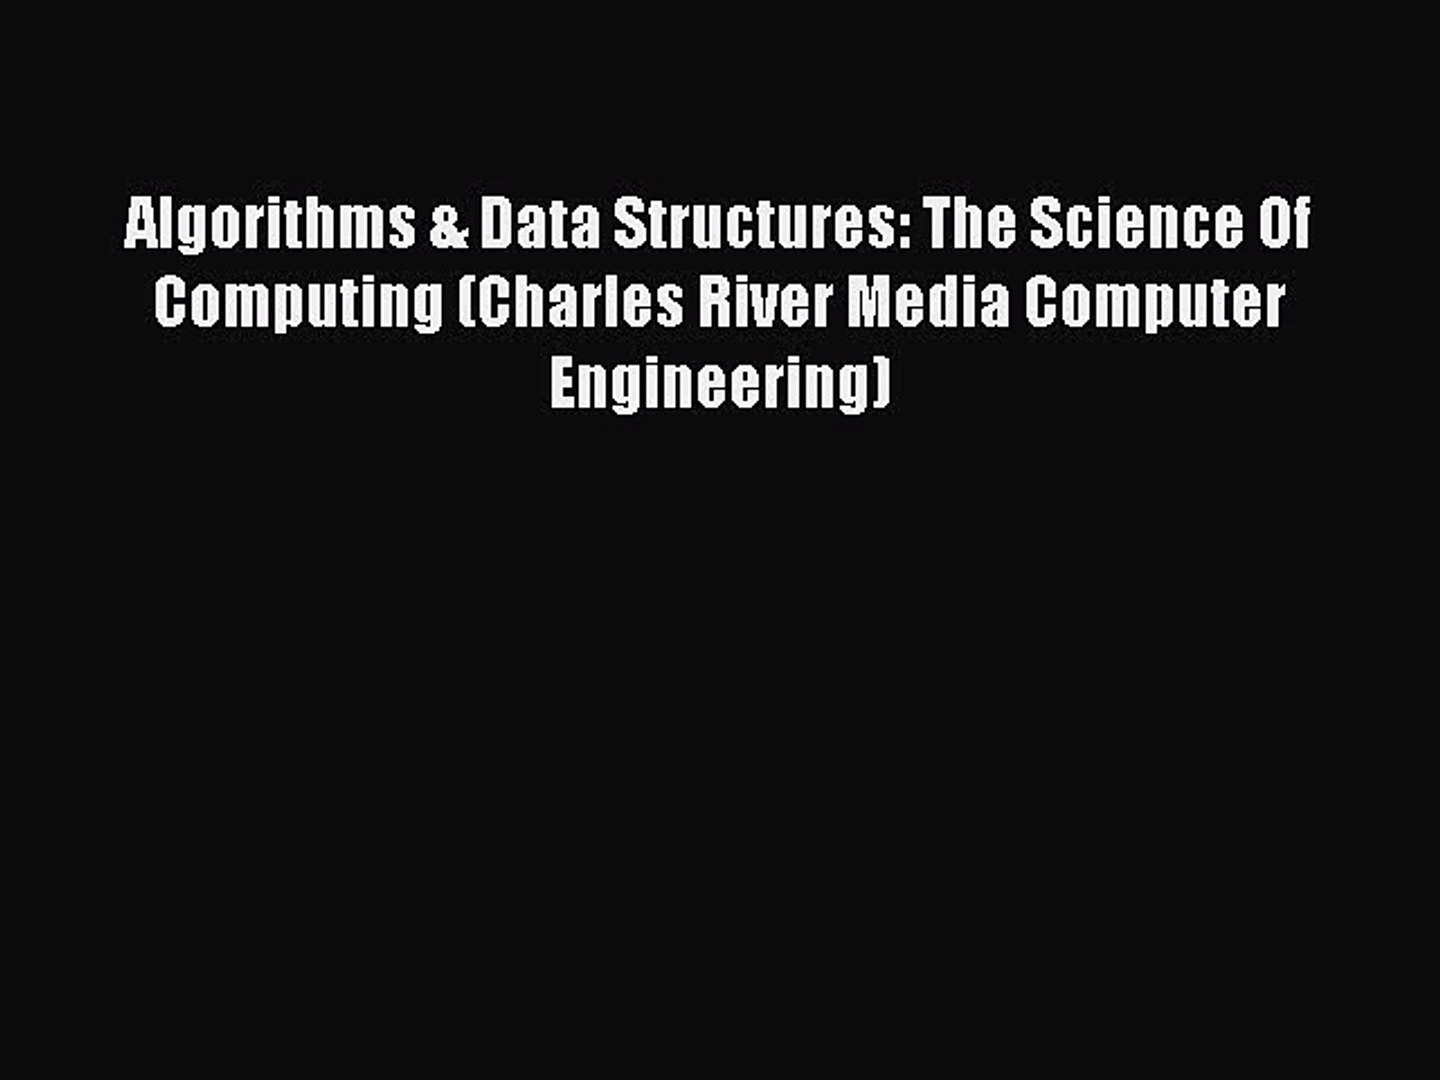 Download Algorithms & Data Structures: The Science Of Computing (Charles River Media Computer